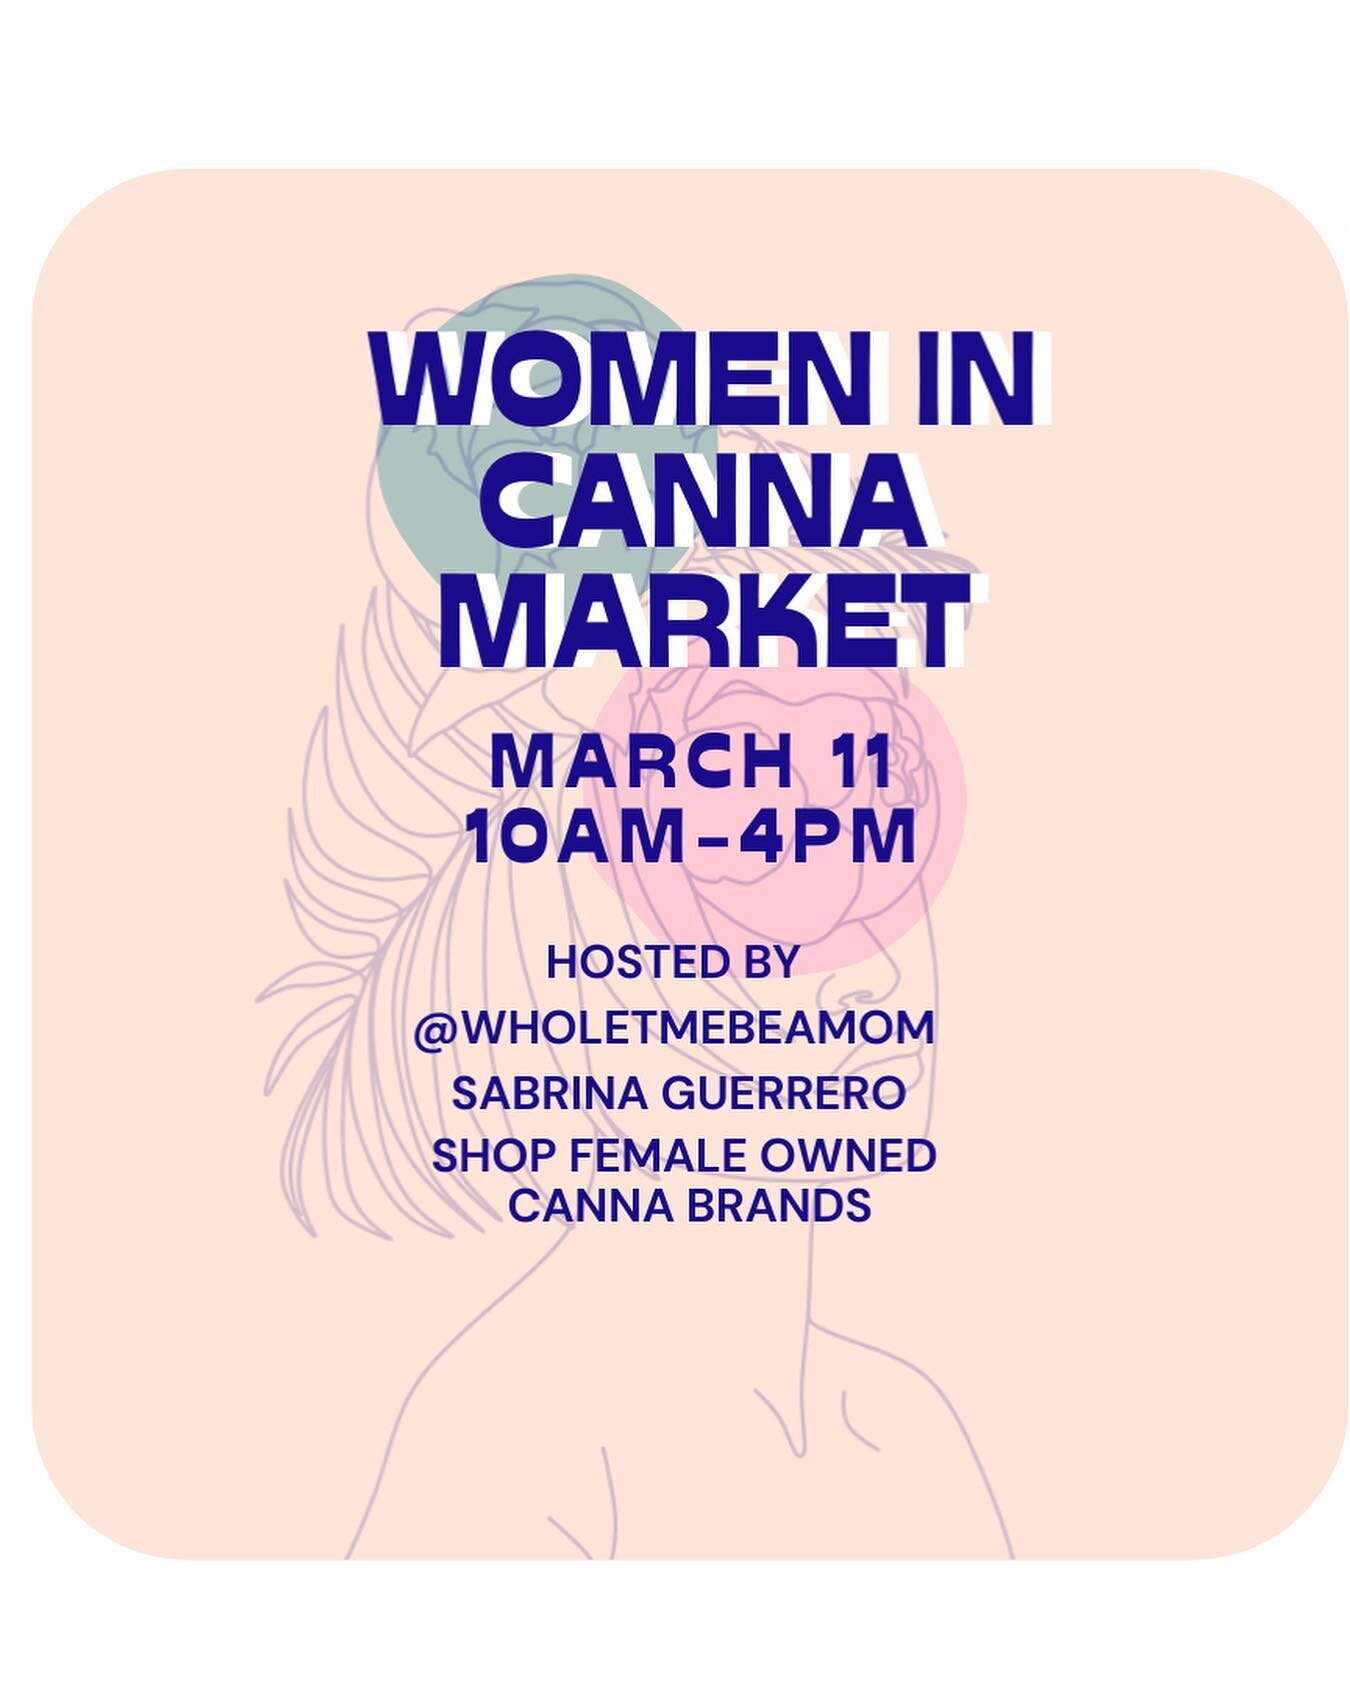 March 11 from 10-4pm, join us for the a women&rsquo;s canna market in partnership With @wholetmebeamom! See you guys there. ☺️